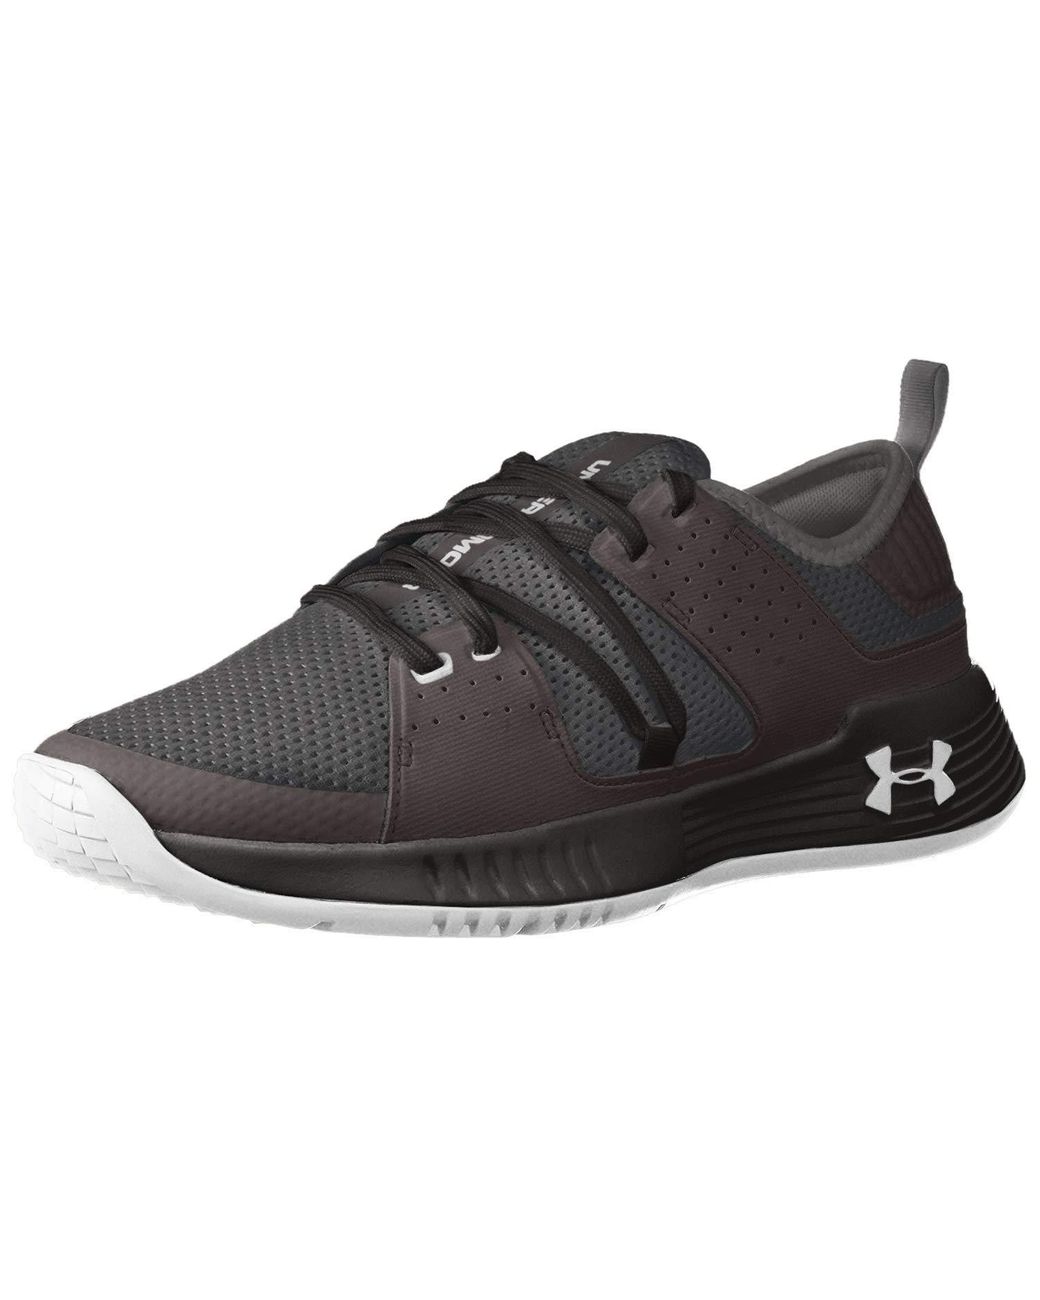 showstopper 2.0 under armour